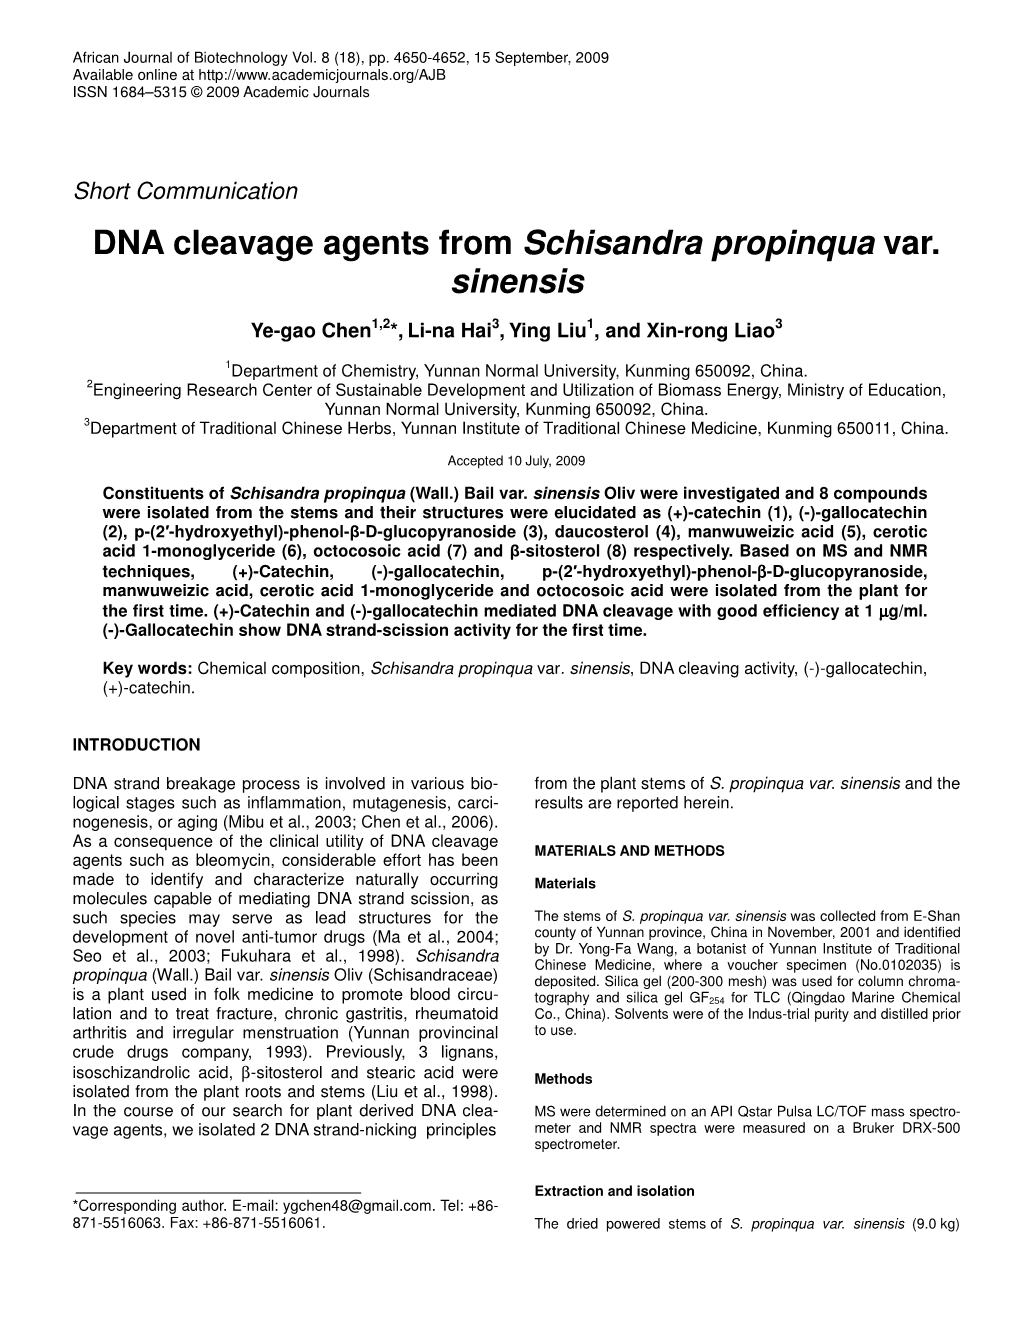 DNA Cleavage Agents from Schisandra Propinqua Var. Sinensis